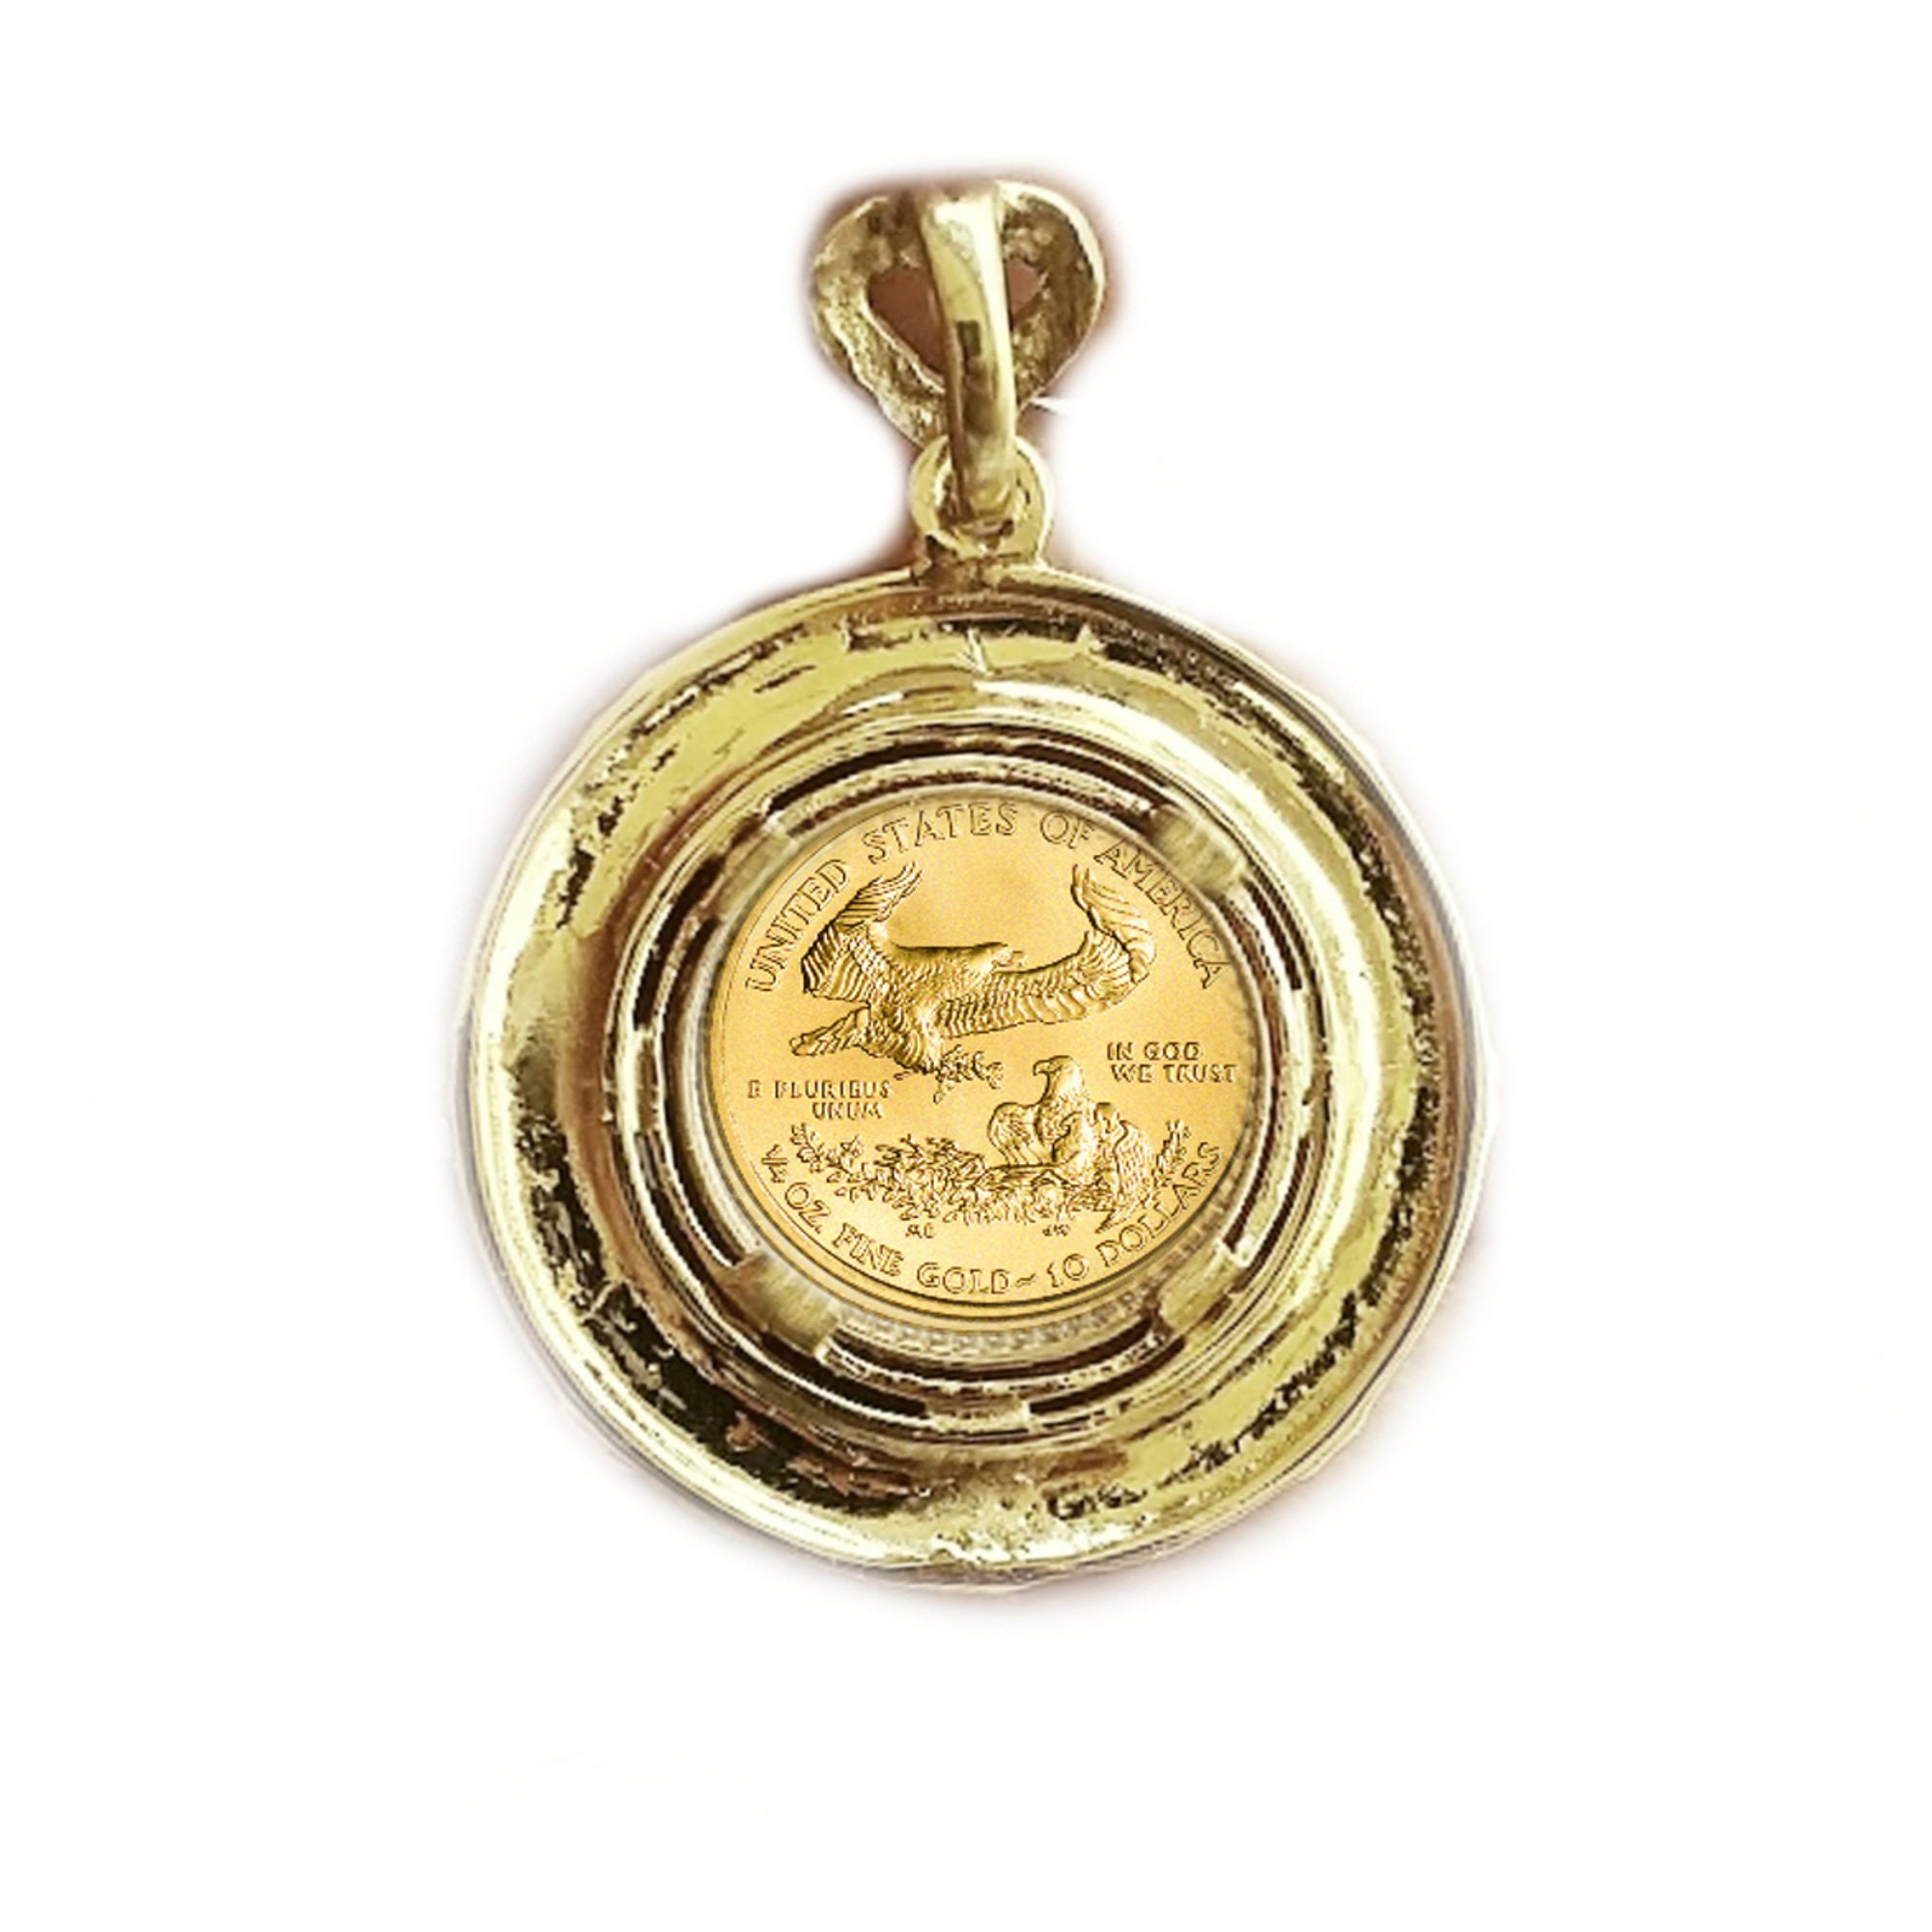 Gold Coin Pendant-Paperclip Chain Necklace-Shiny Gold Coin-Reproduction Coin-LibertyCoin-Carabiner Clasp-Spring Lock Clasp-Aesthetic Jewel